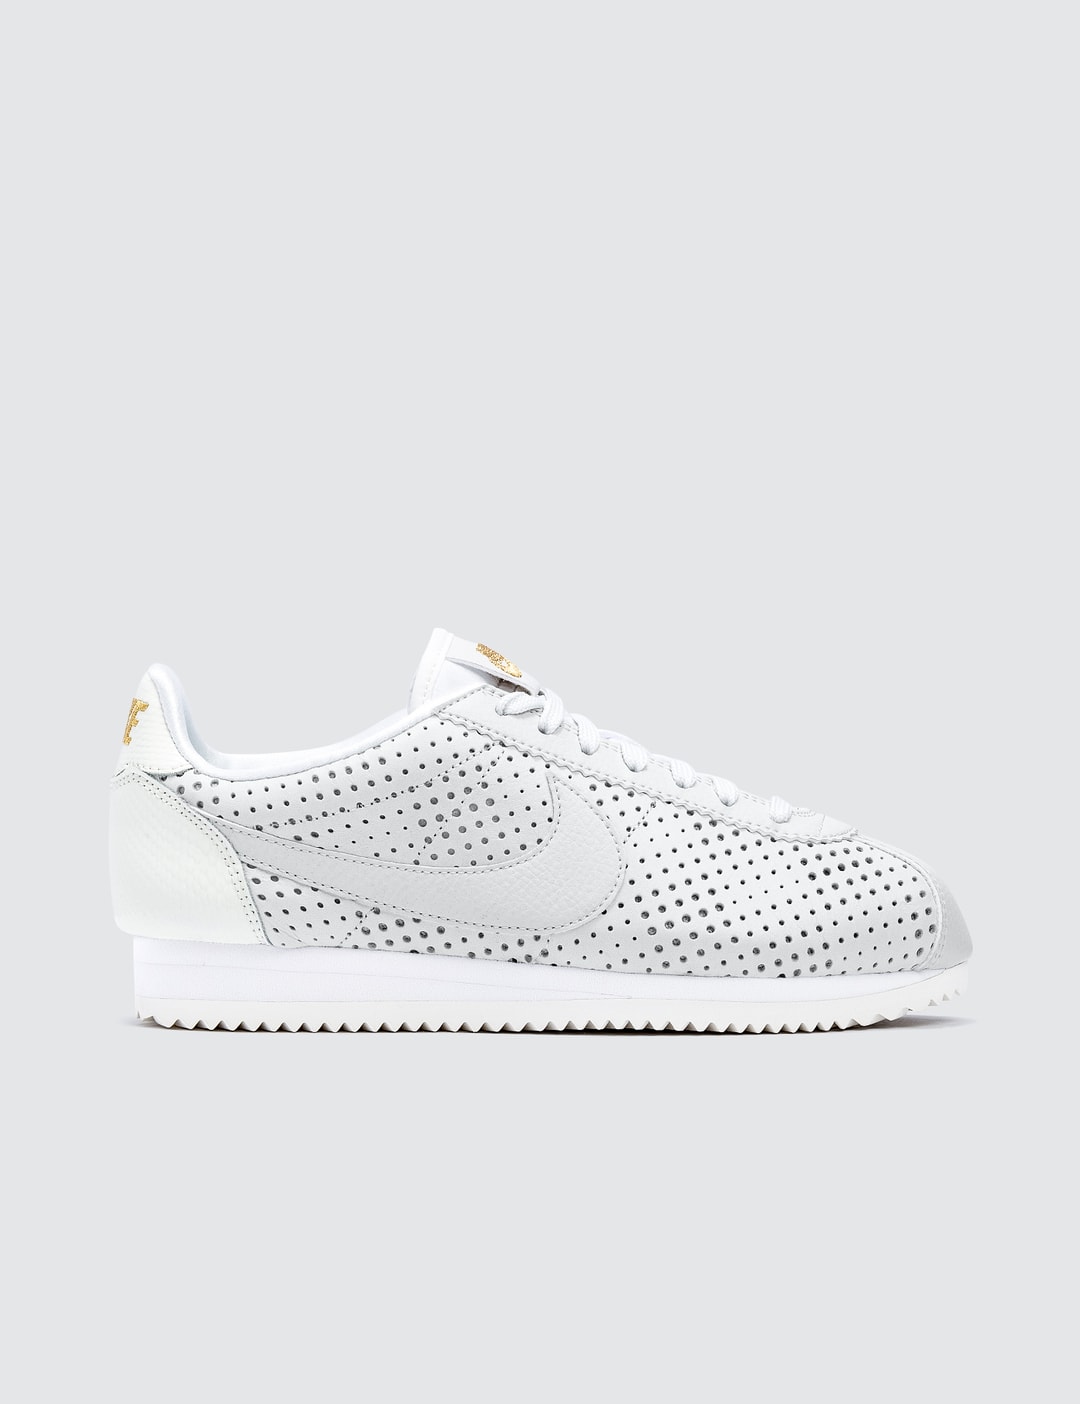 Nike - Nike Cortez Classic SE PRM | HBX - Globally Curated Fashion and Lifestyle by Hypebeast